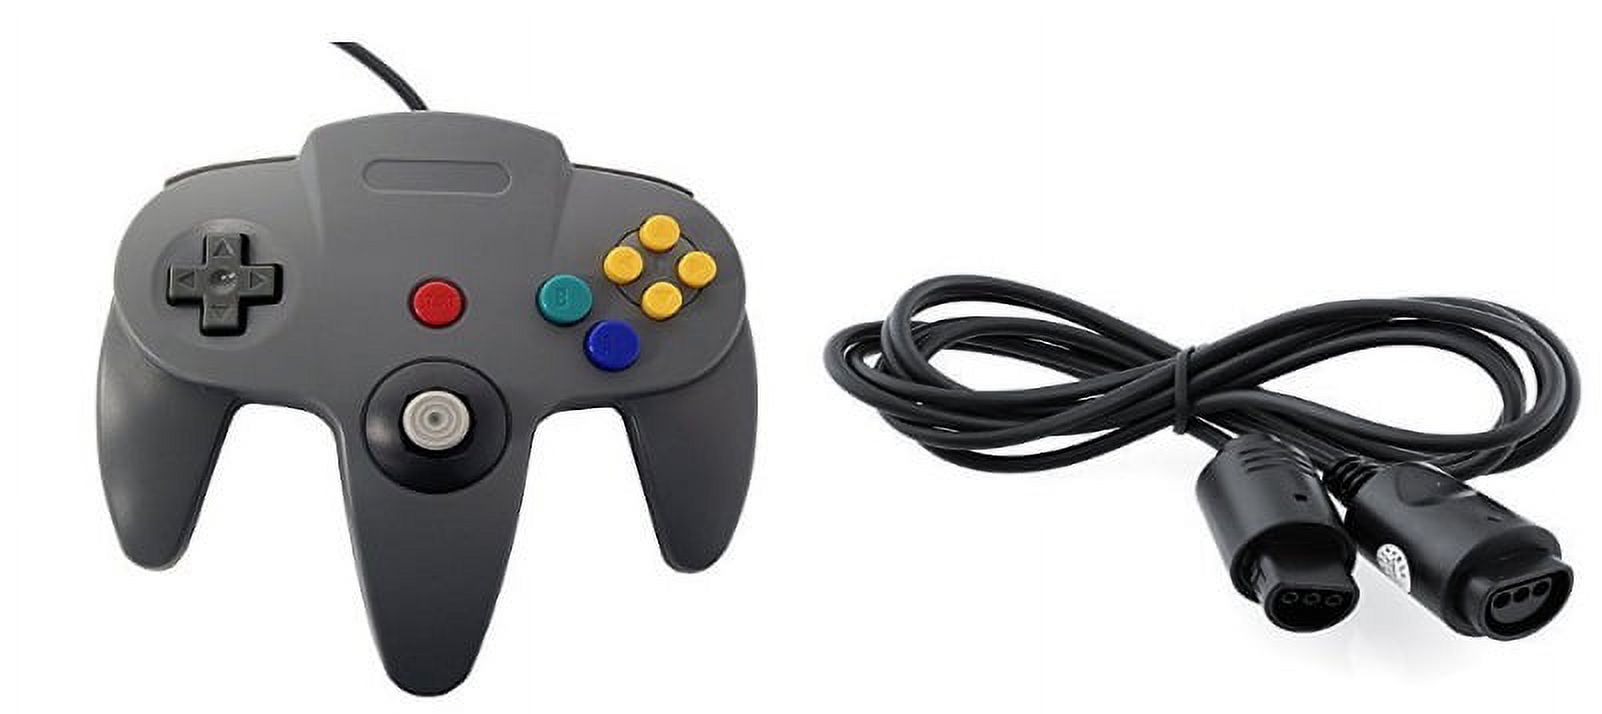 Nintendo N64 Grey Replacement Controller And Extension Cord By Mars Devices Gray - image 1 of 6